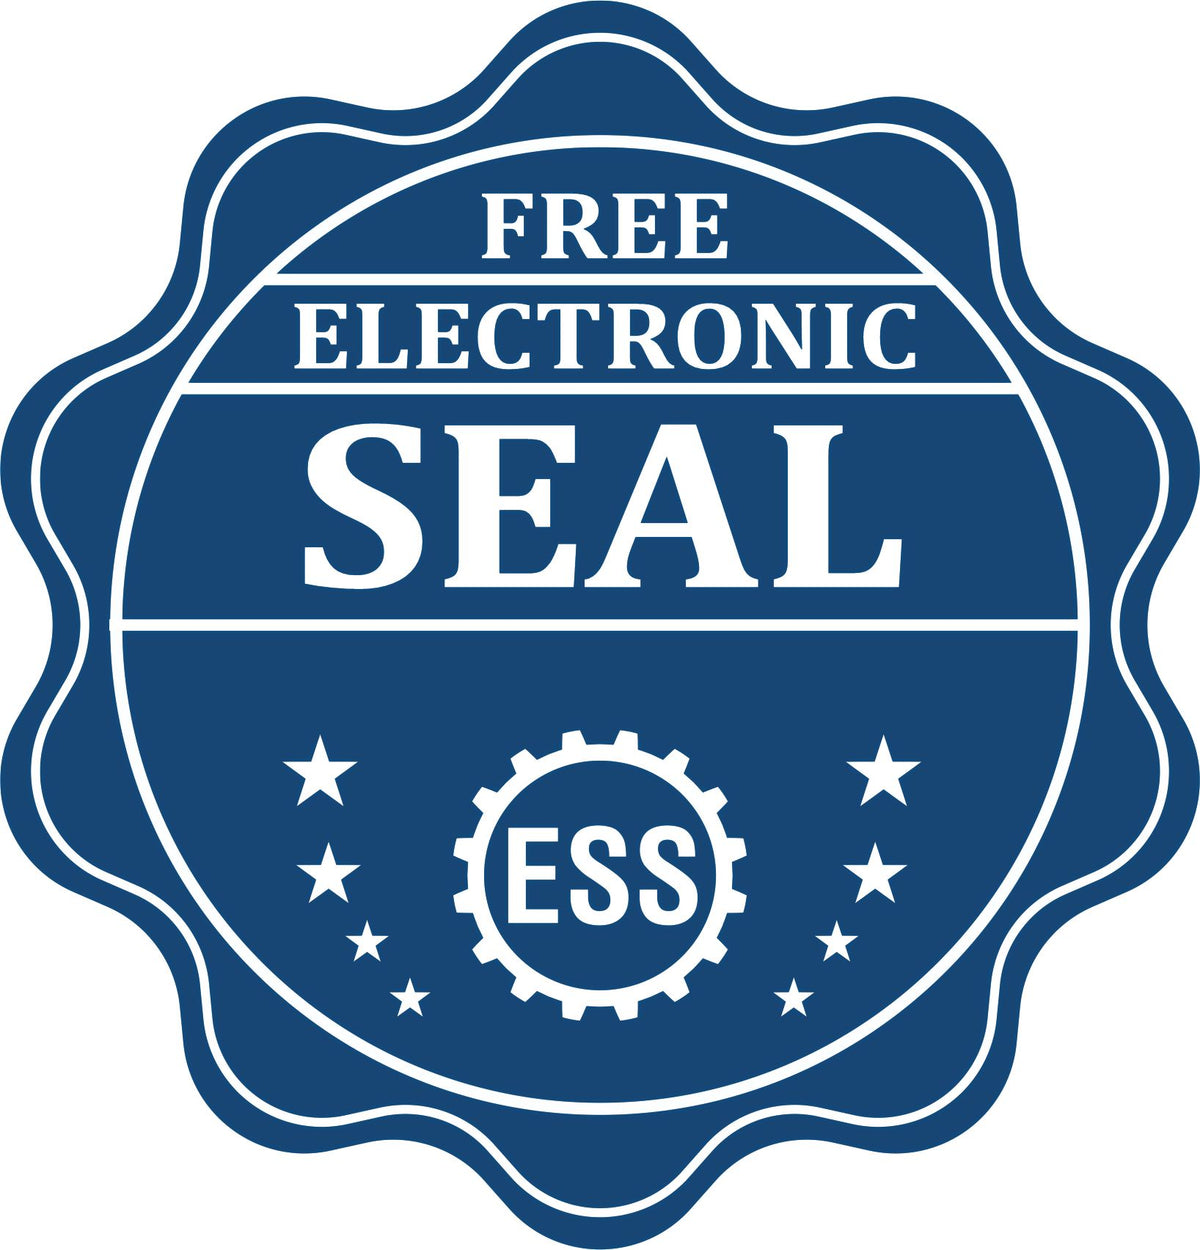 A badge showing a free electronic seal for the Slim Pre-Inked Alaska Professional Geologist Seal Stamp with stars and the ESS gear on the emblem.